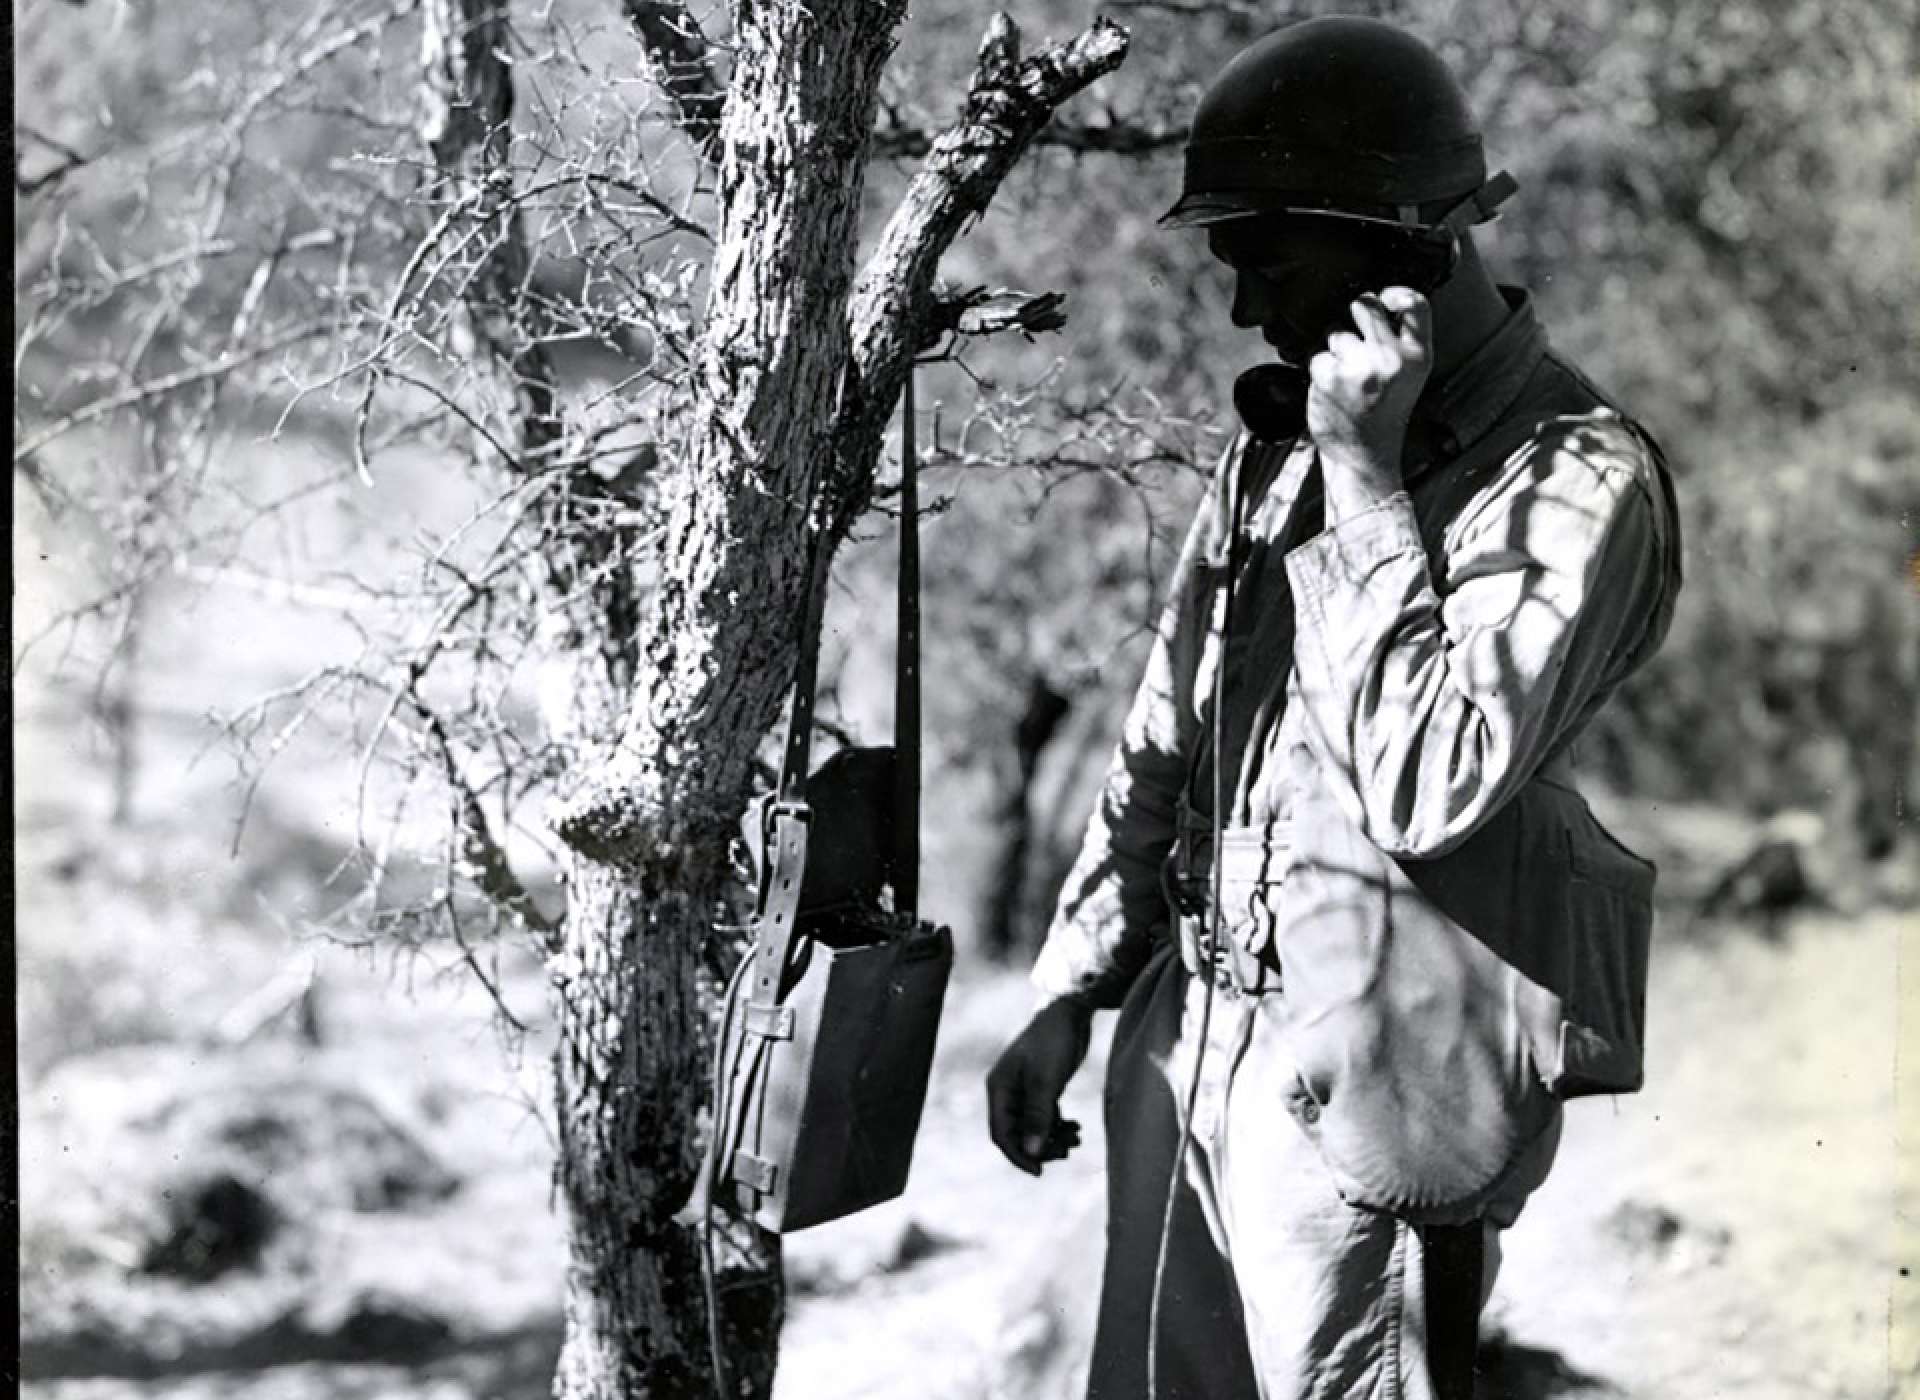 3-24-44. Ecklund. T/5 W. T. Gardner, 89 Sig Platoon, 89 Div, is testing a EE8A Field Telephone he has just installed at the new area of 89Div CP near Hill 2280 HLMR. HLMR MTN Man. R 168-9-44-659. Army Signal Corps photograph  Photographer: Ecklund. 24 March 1944. Gift in Memory of Maurice T. White, 2011.065.1909